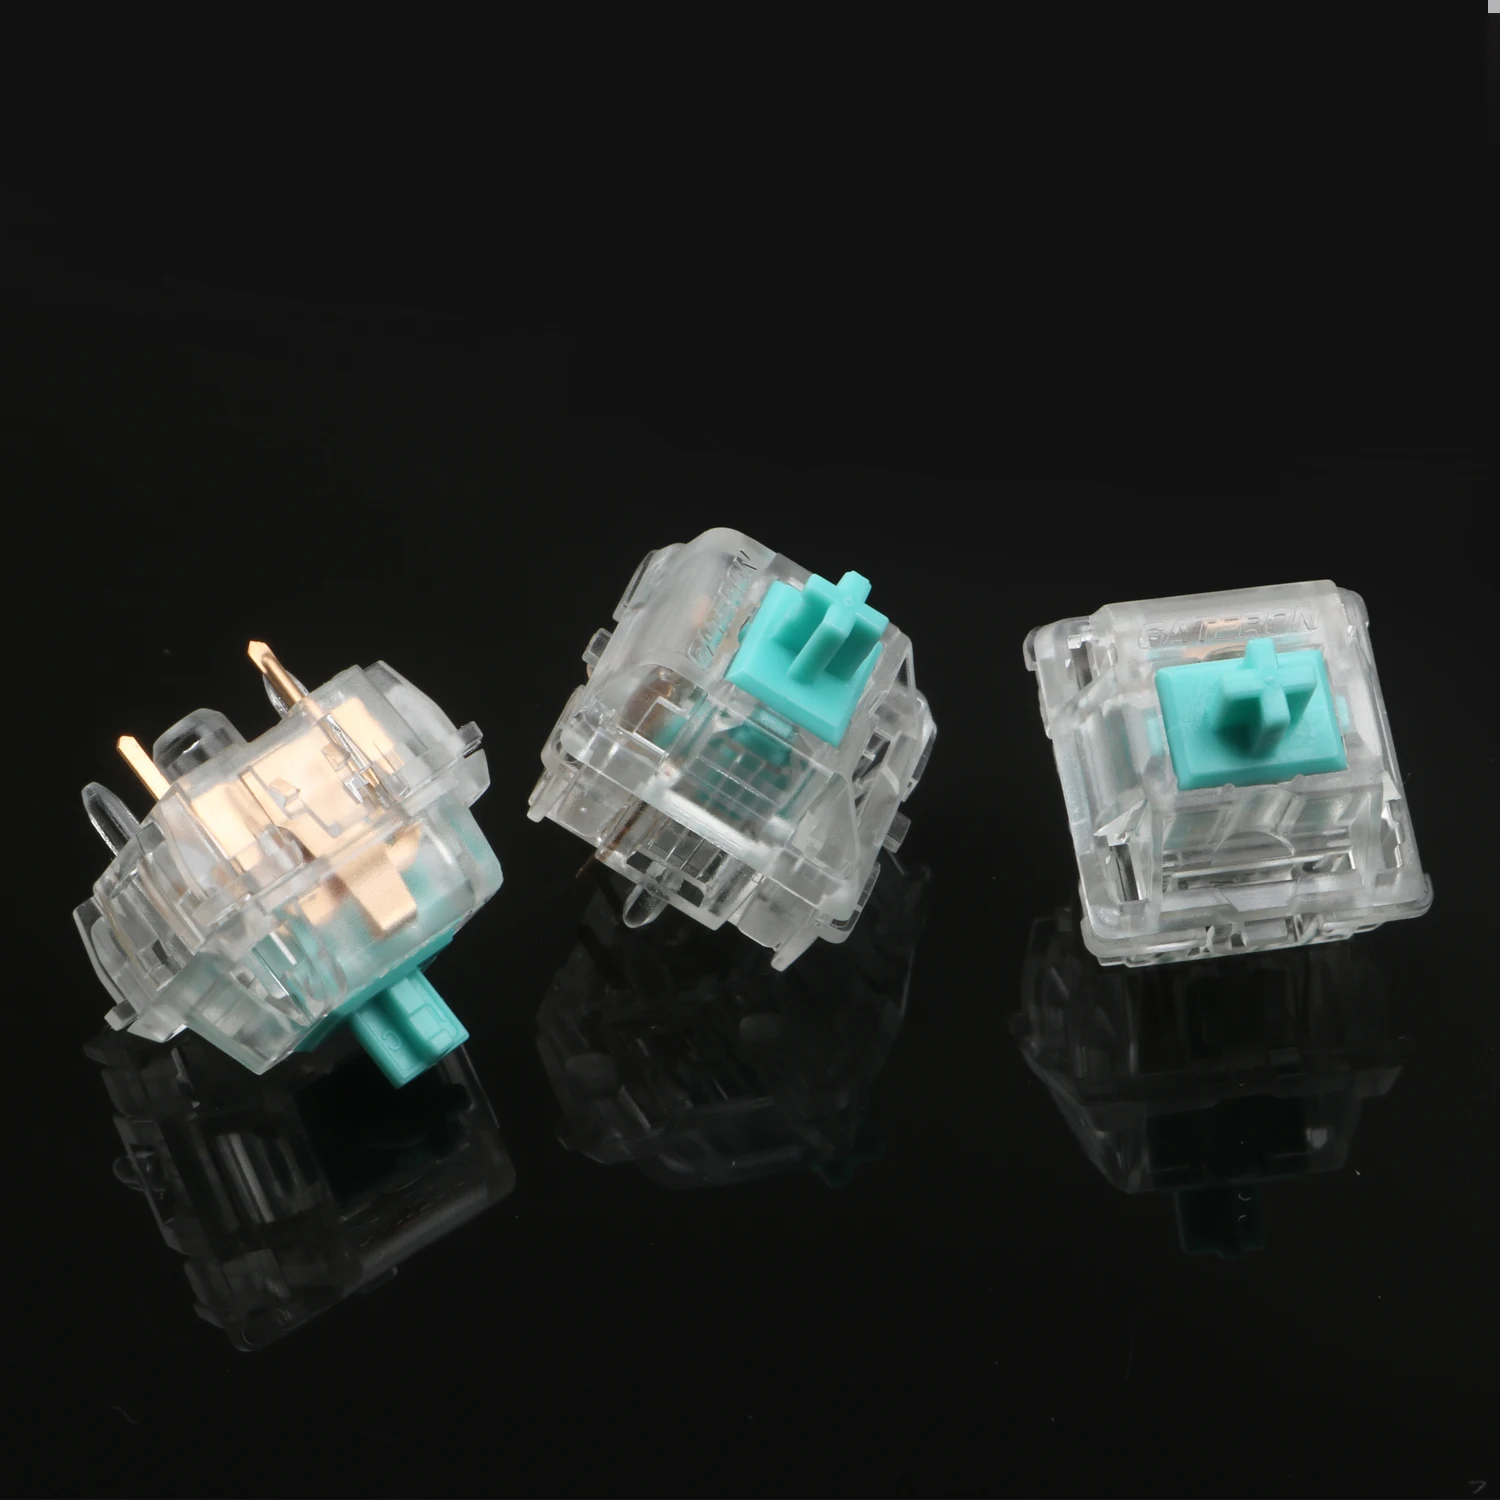 

Original Zeal Tealios V2 switch 67g linear switches for customized mechanical keyboard 5 pins